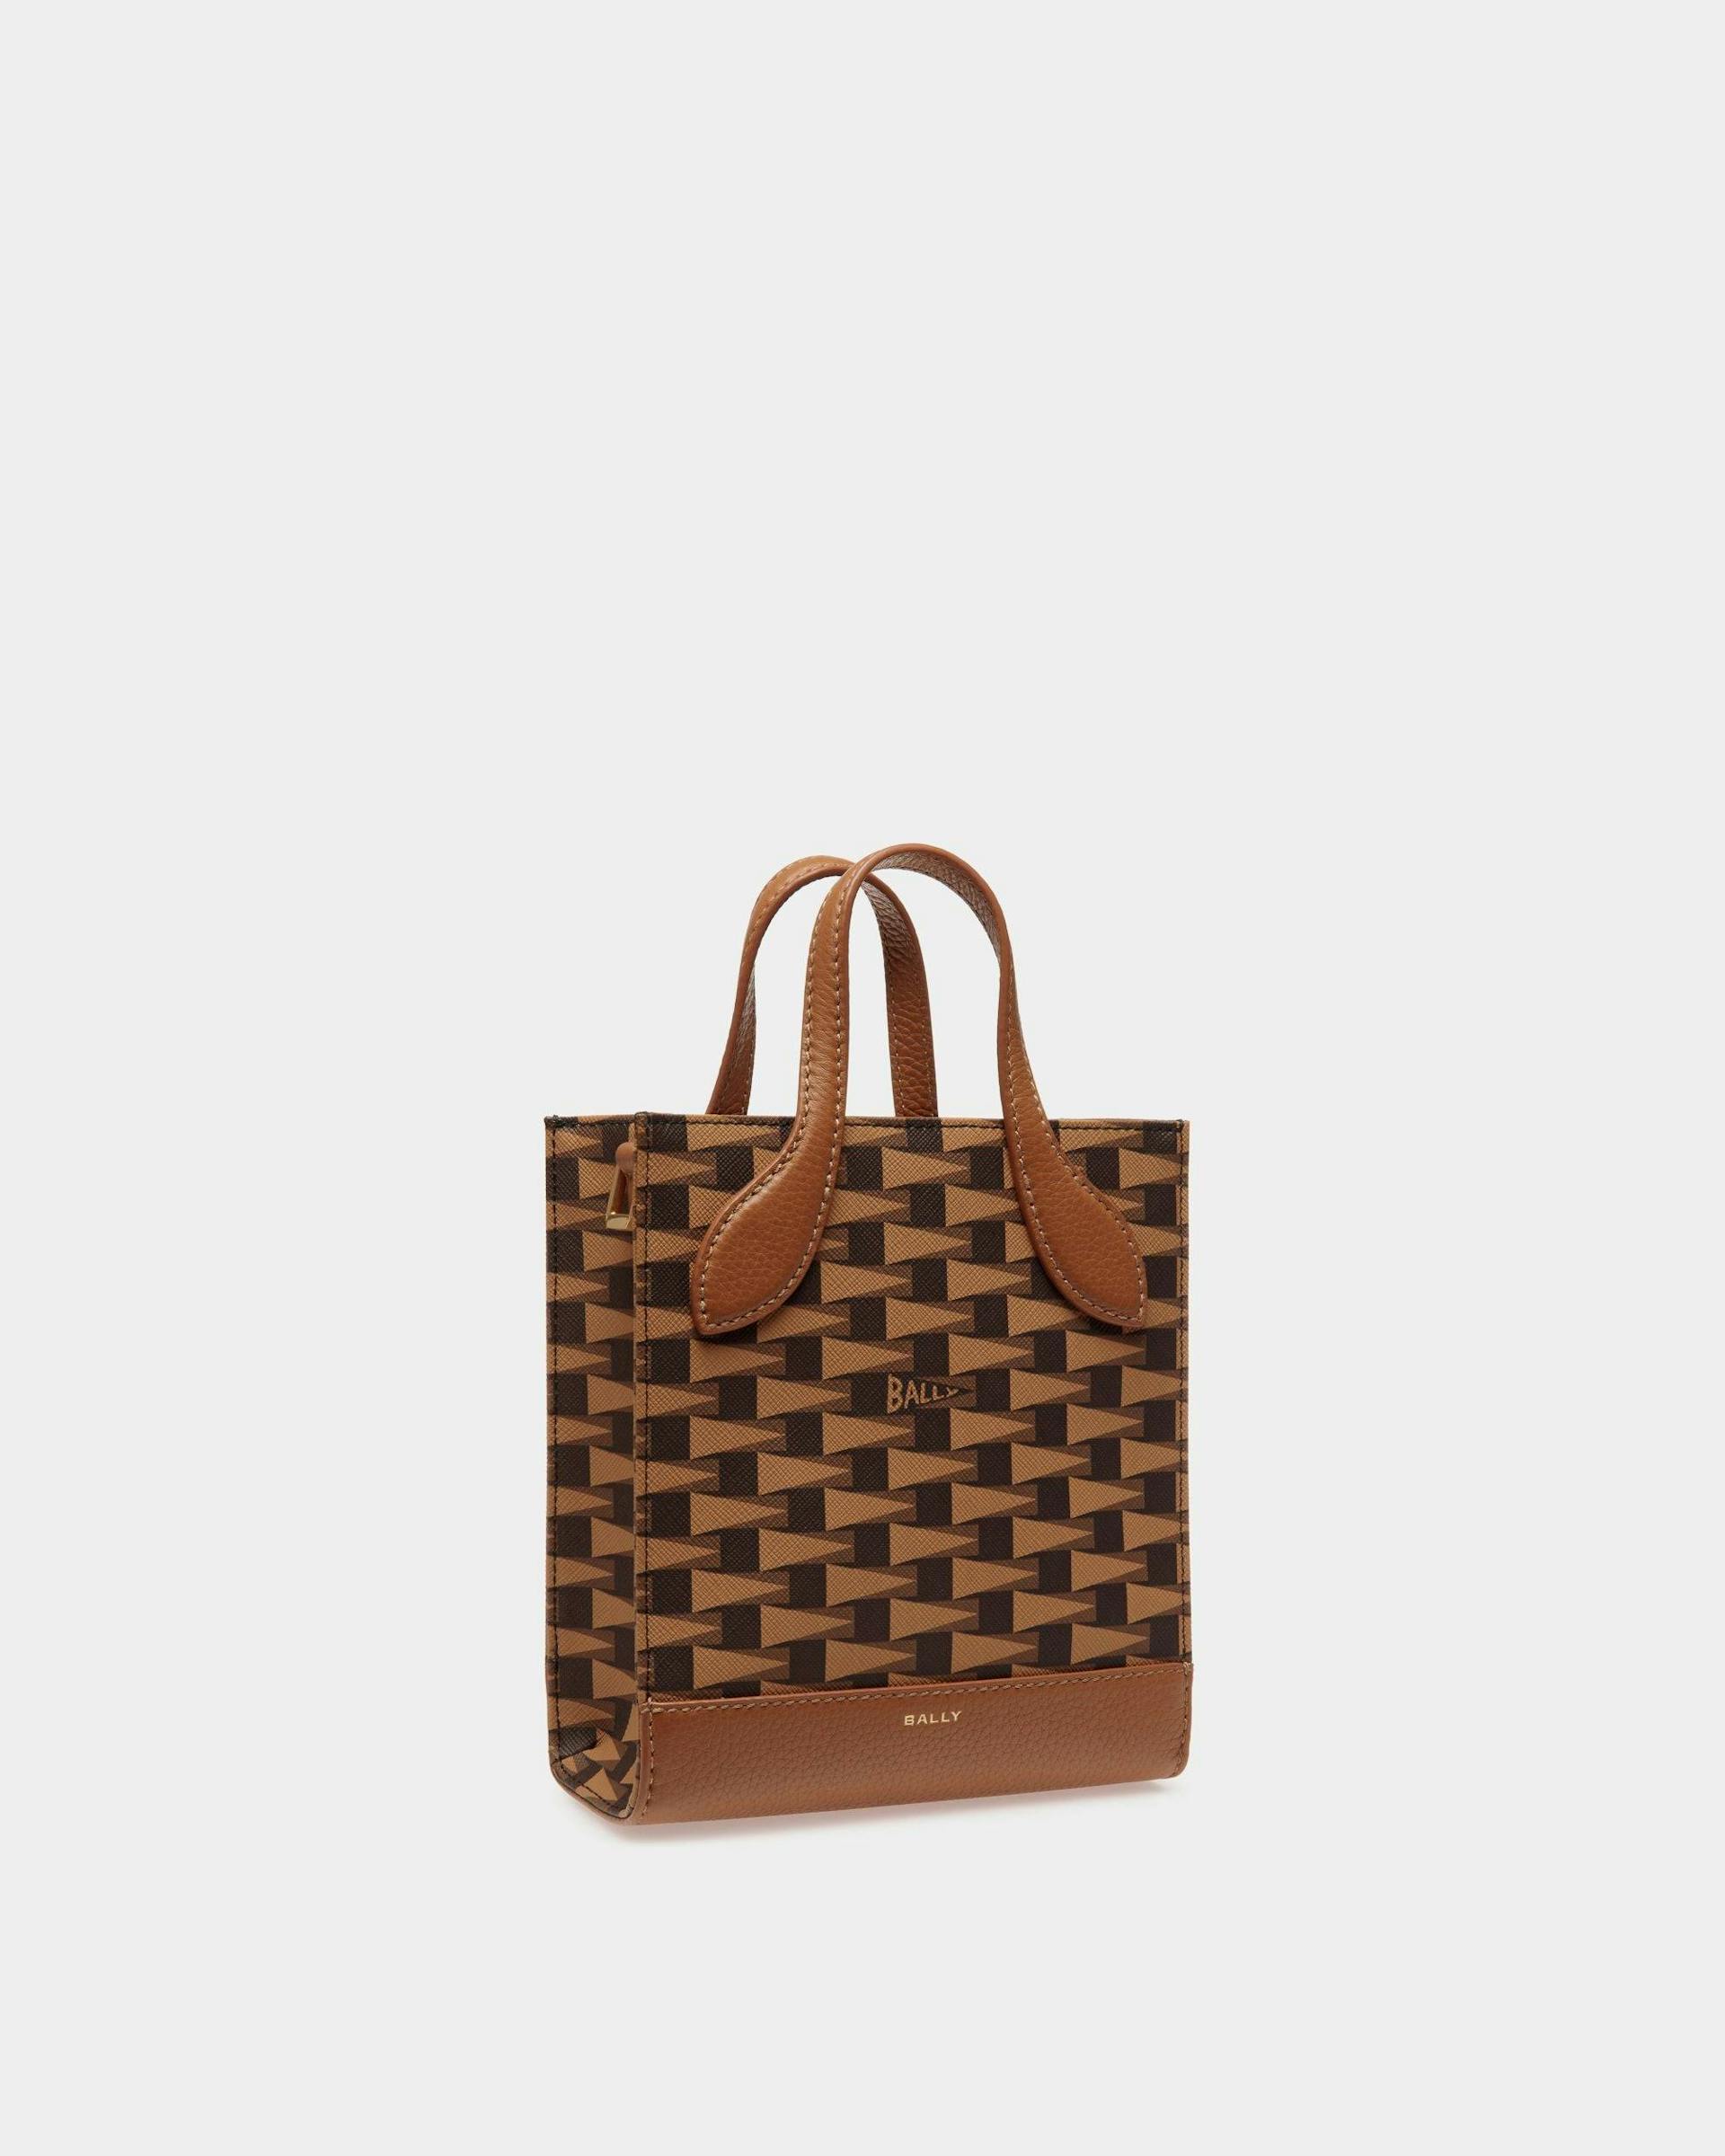 Women's Pennant Mini Tote Bag in Brown Pennant Motif TPU | Bally | Still Life 3/4 Front